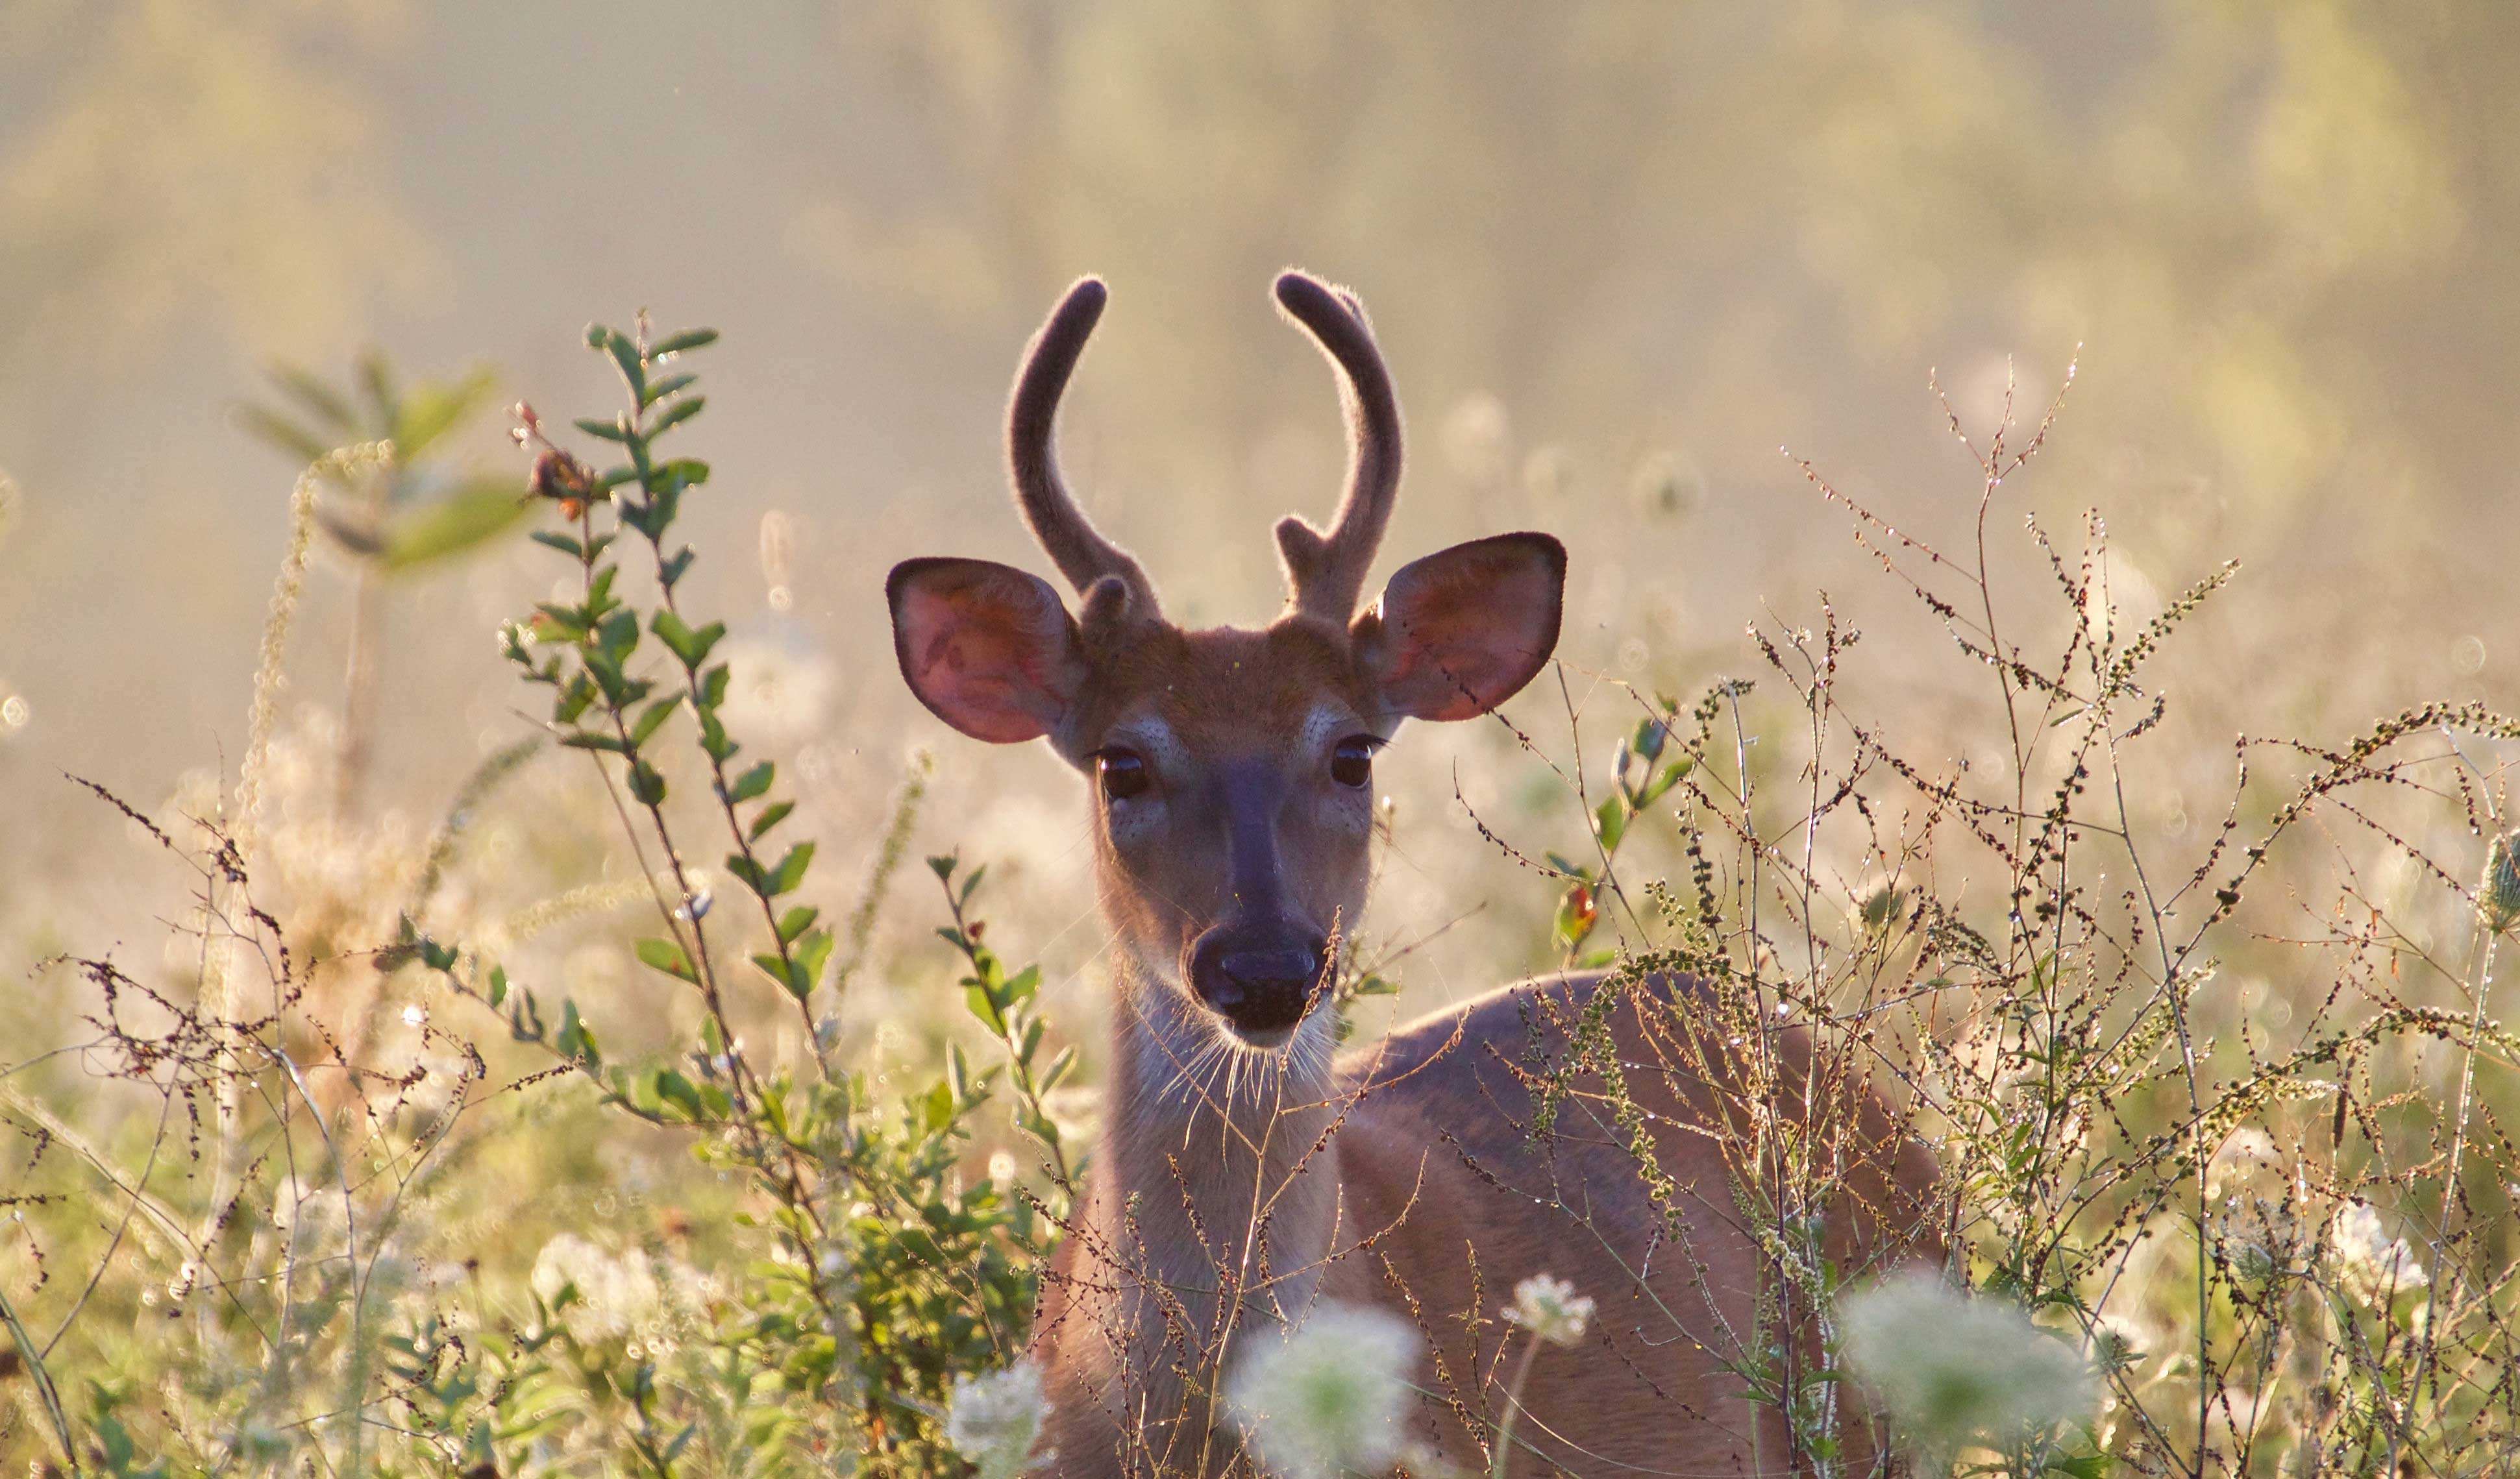 A deer surrounded by vegetation in a field.